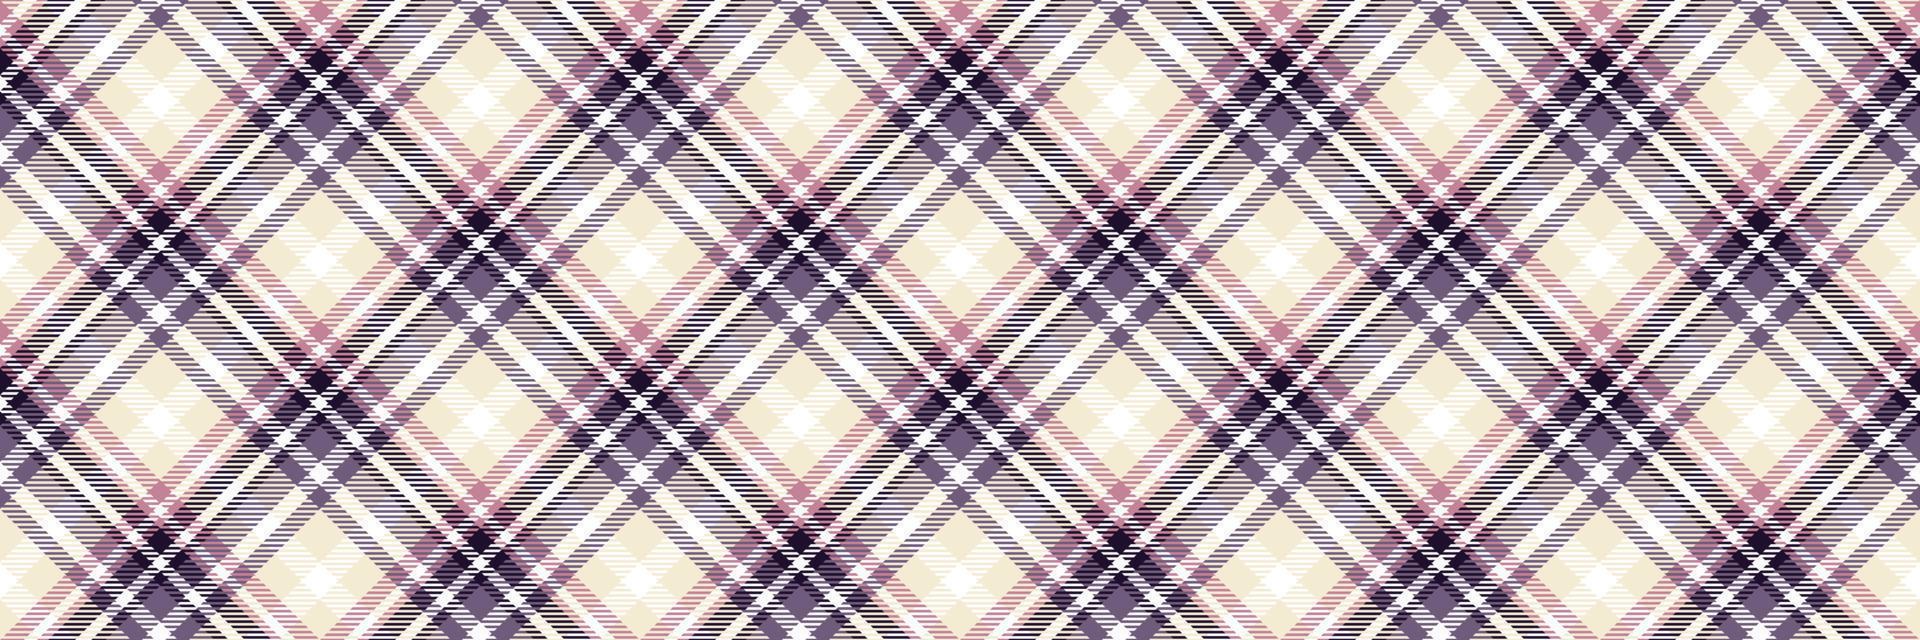 Vector Plaid seamless pattern is a patterned cloth consisting of criss crossed, horizontal and vertical bands in multiple colours.plaid Seamless for  scarf,pyjamas,blanket,duvet,kilt large shawl.